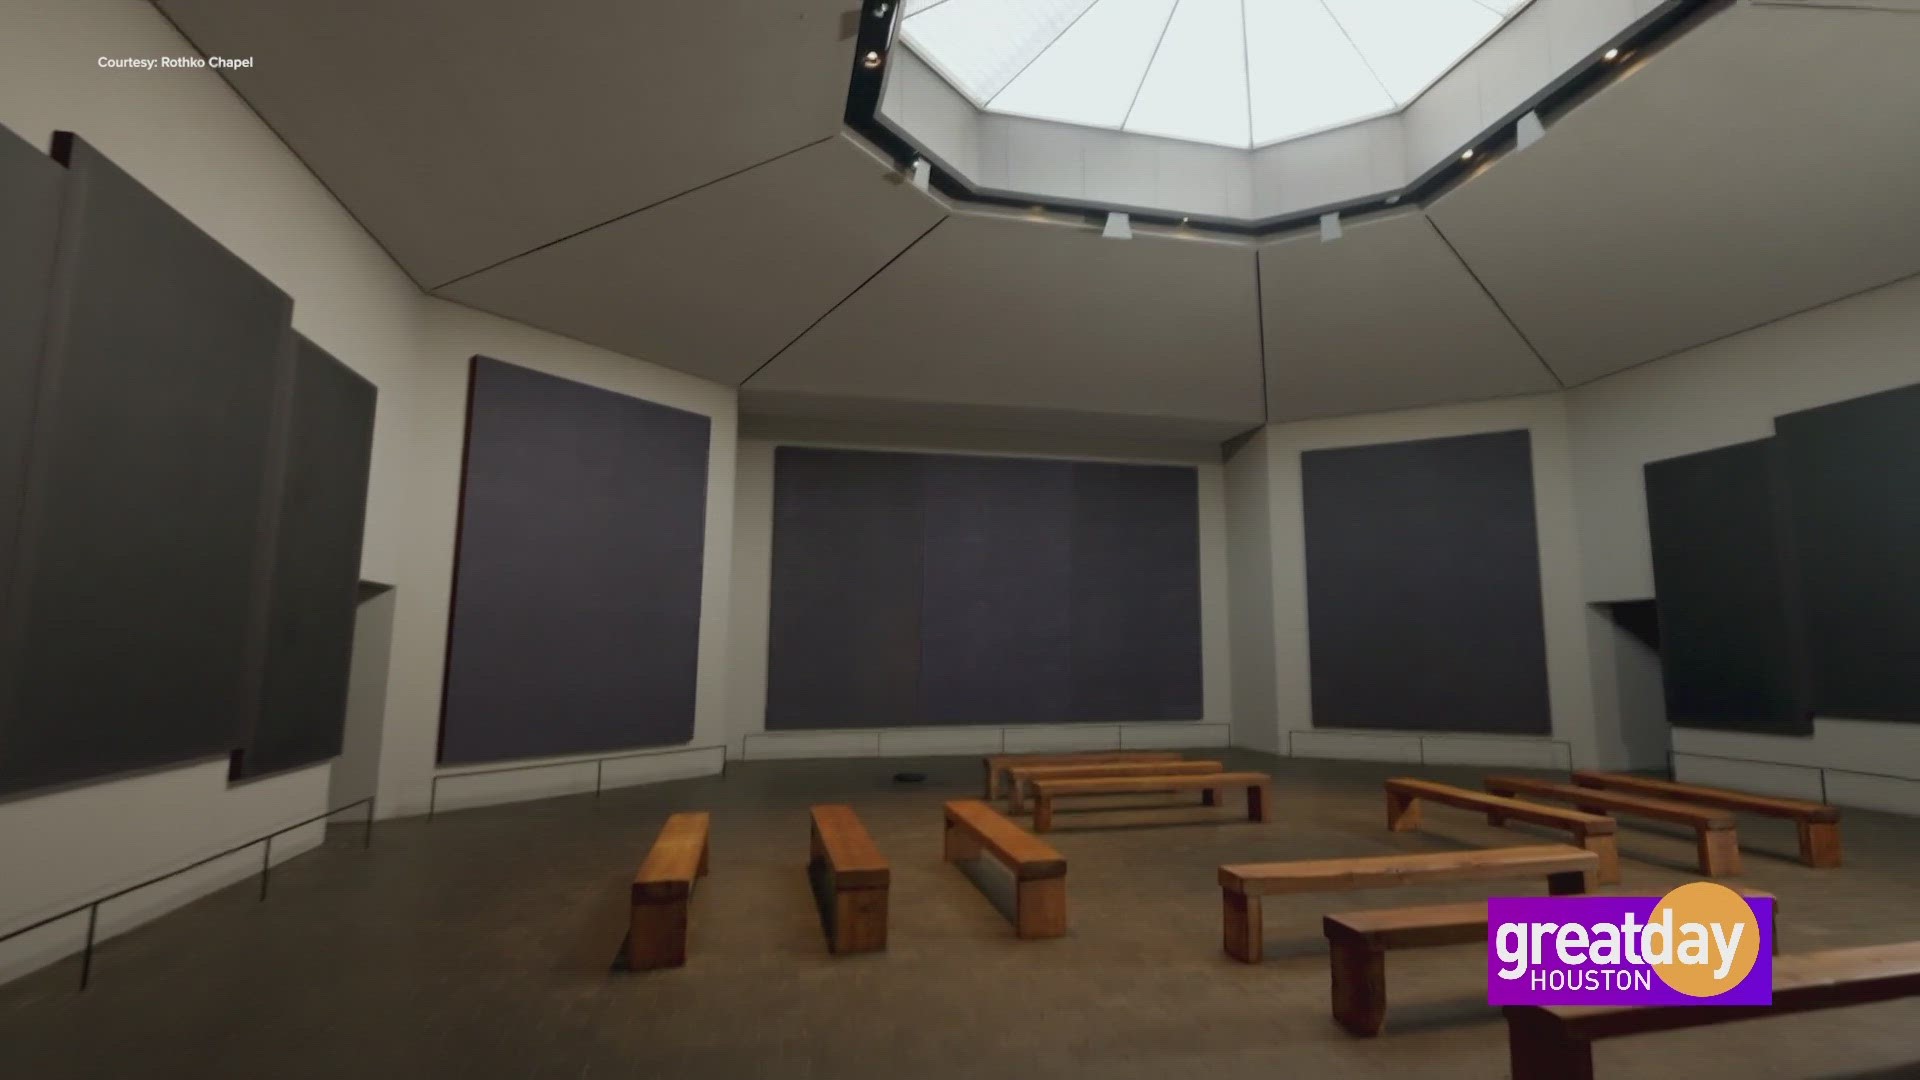 The Rothko Chapel showcases the intersection of art and spirituality.